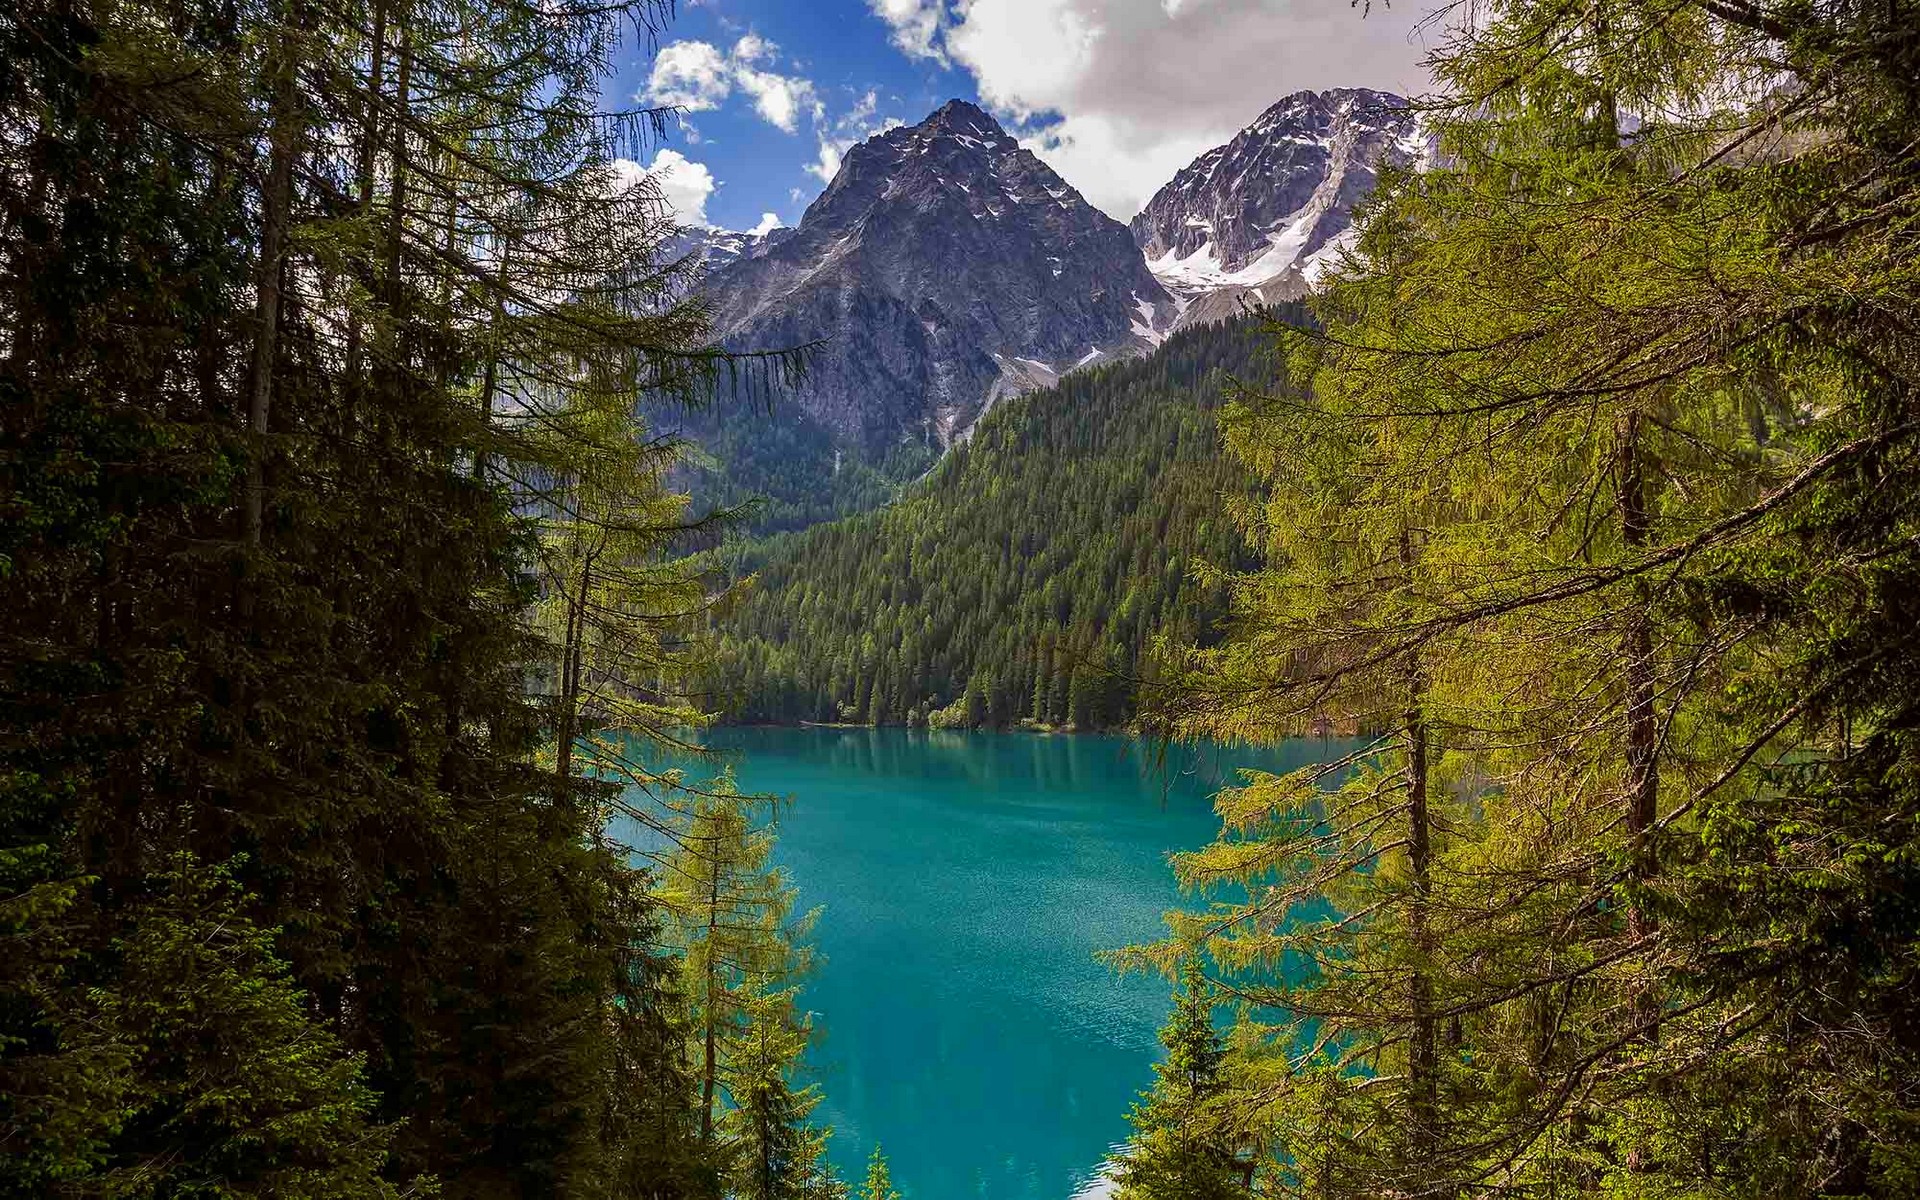 #trees, #nature, #water, #mountains, #turquoise, #forest